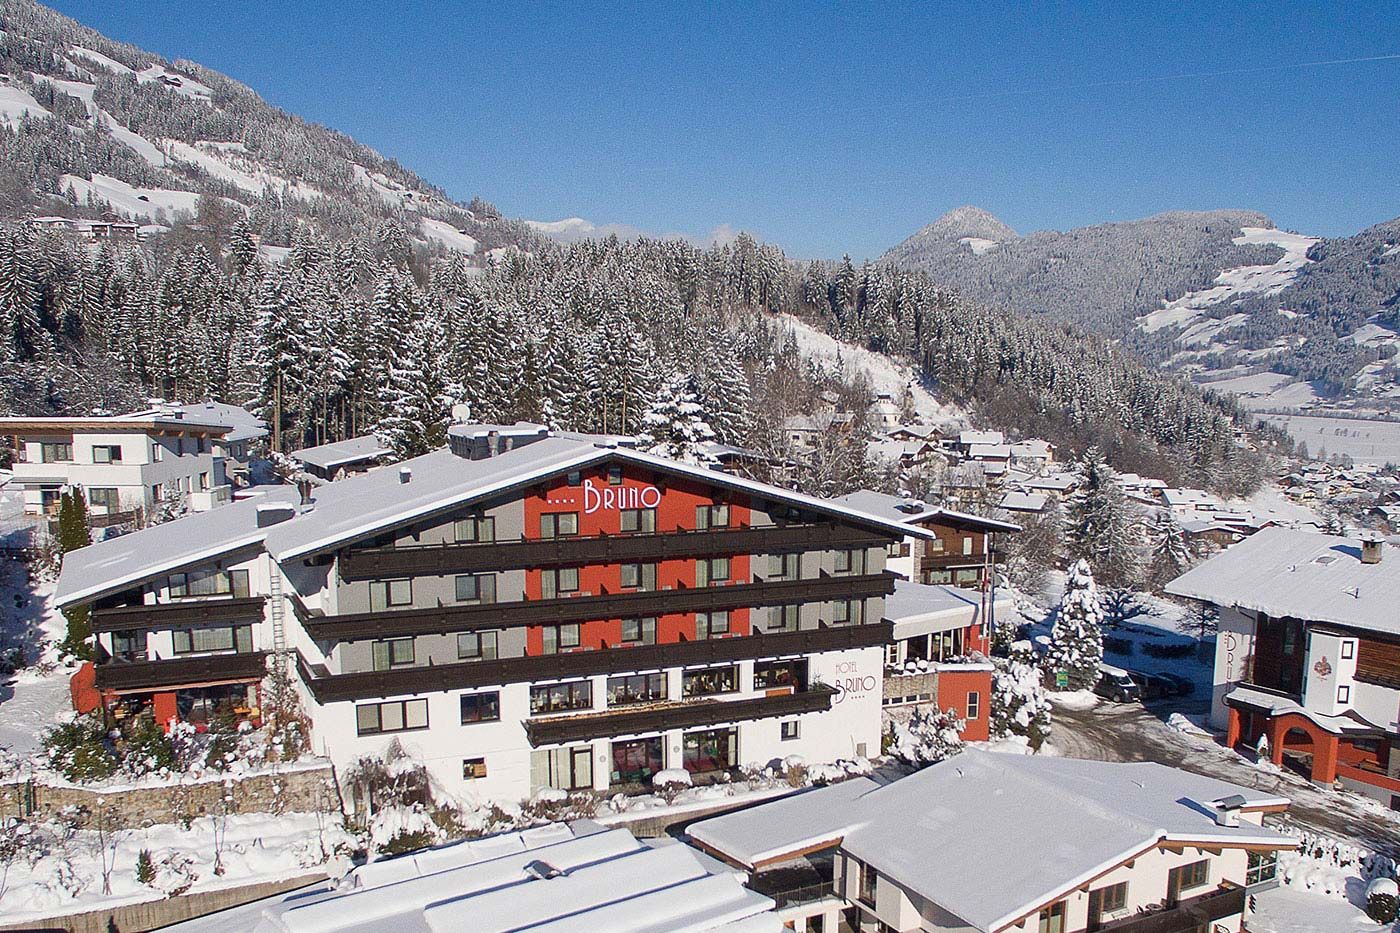 Tyrolean hospitality mixes harmoniously with a sporty, casual atmosphere.